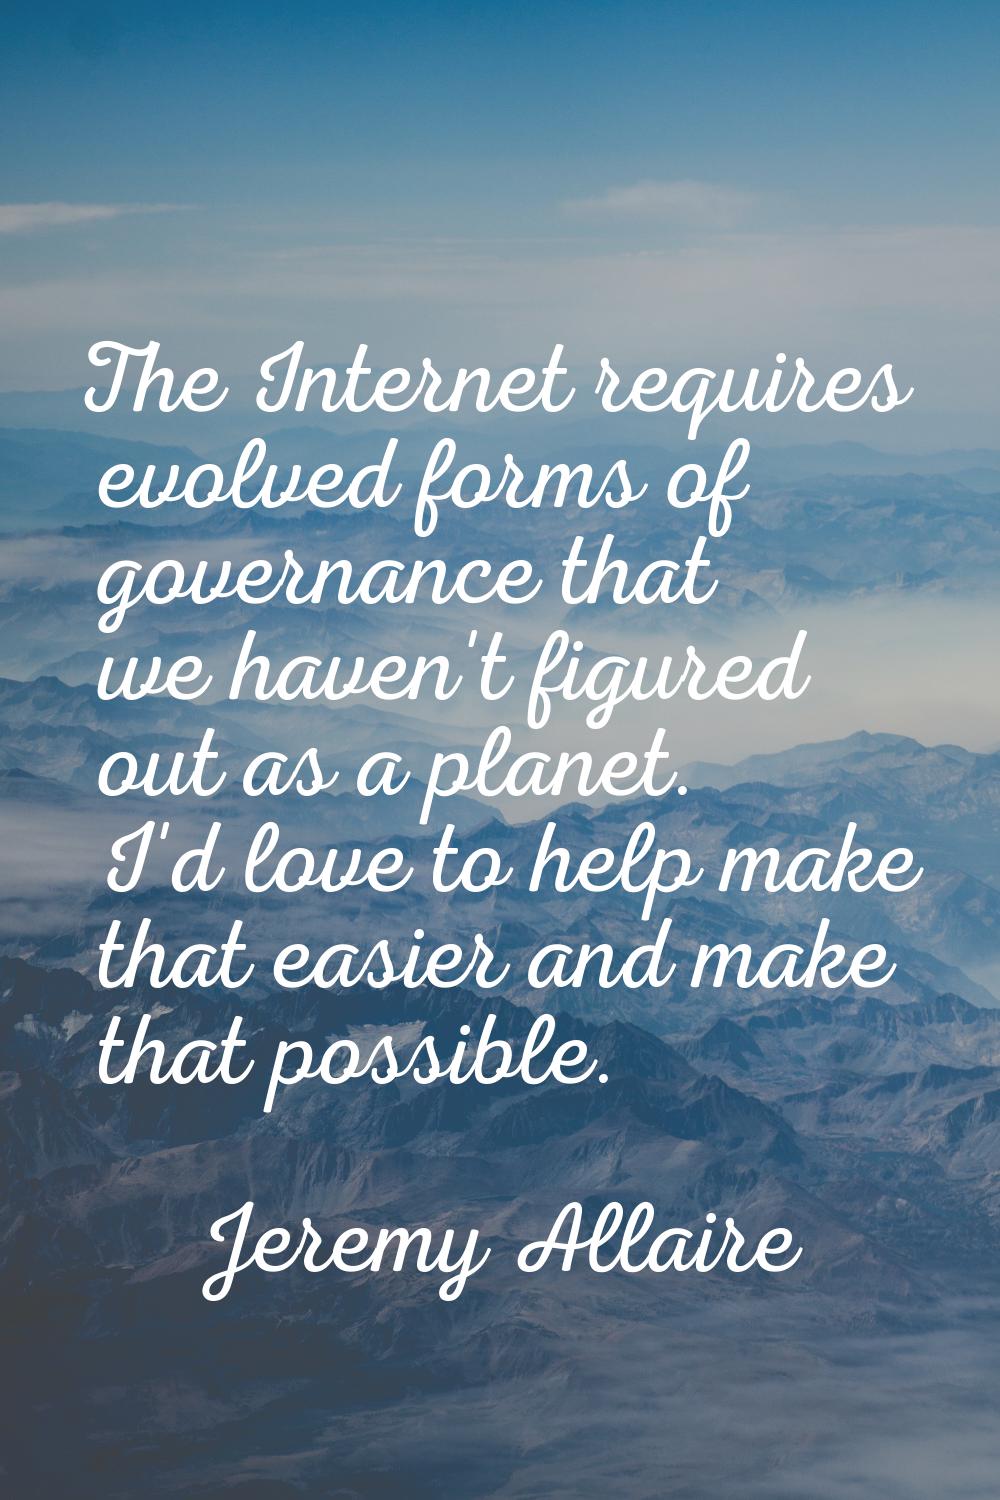 The Internet requires evolved forms of governance that we haven't figured out as a planet. I'd love